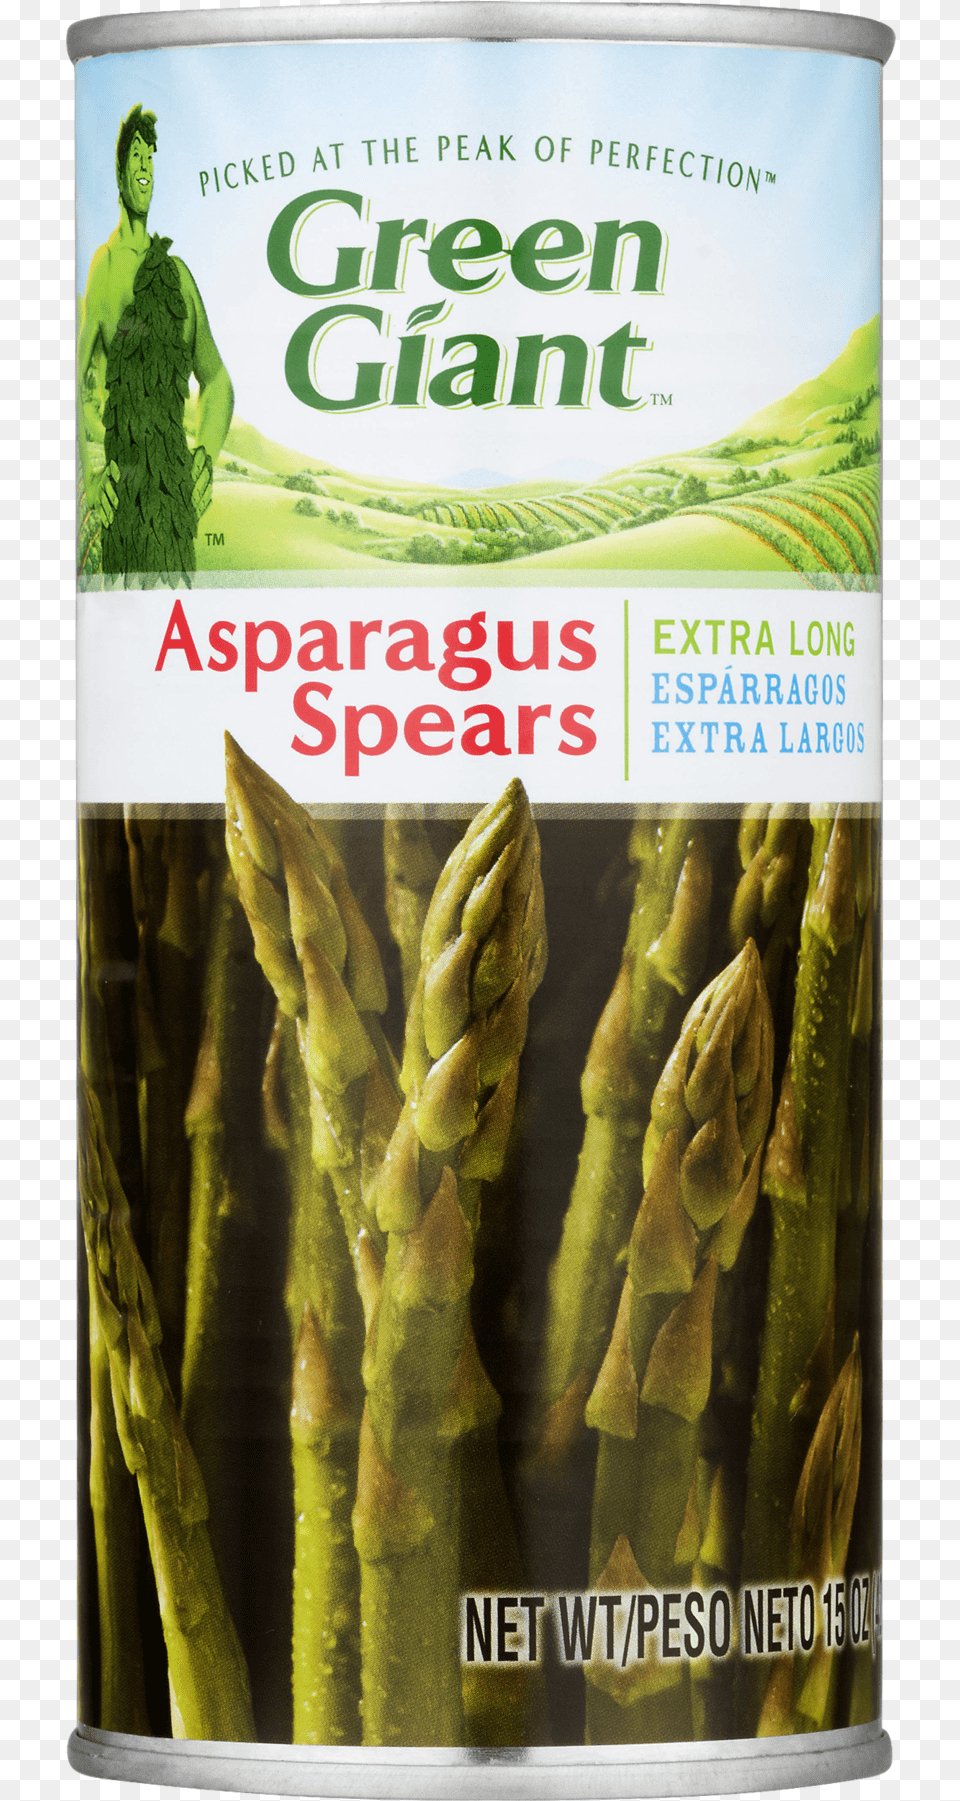 Green Giant Asparagus Spears, Adult, Female, Person, Woman Png Image